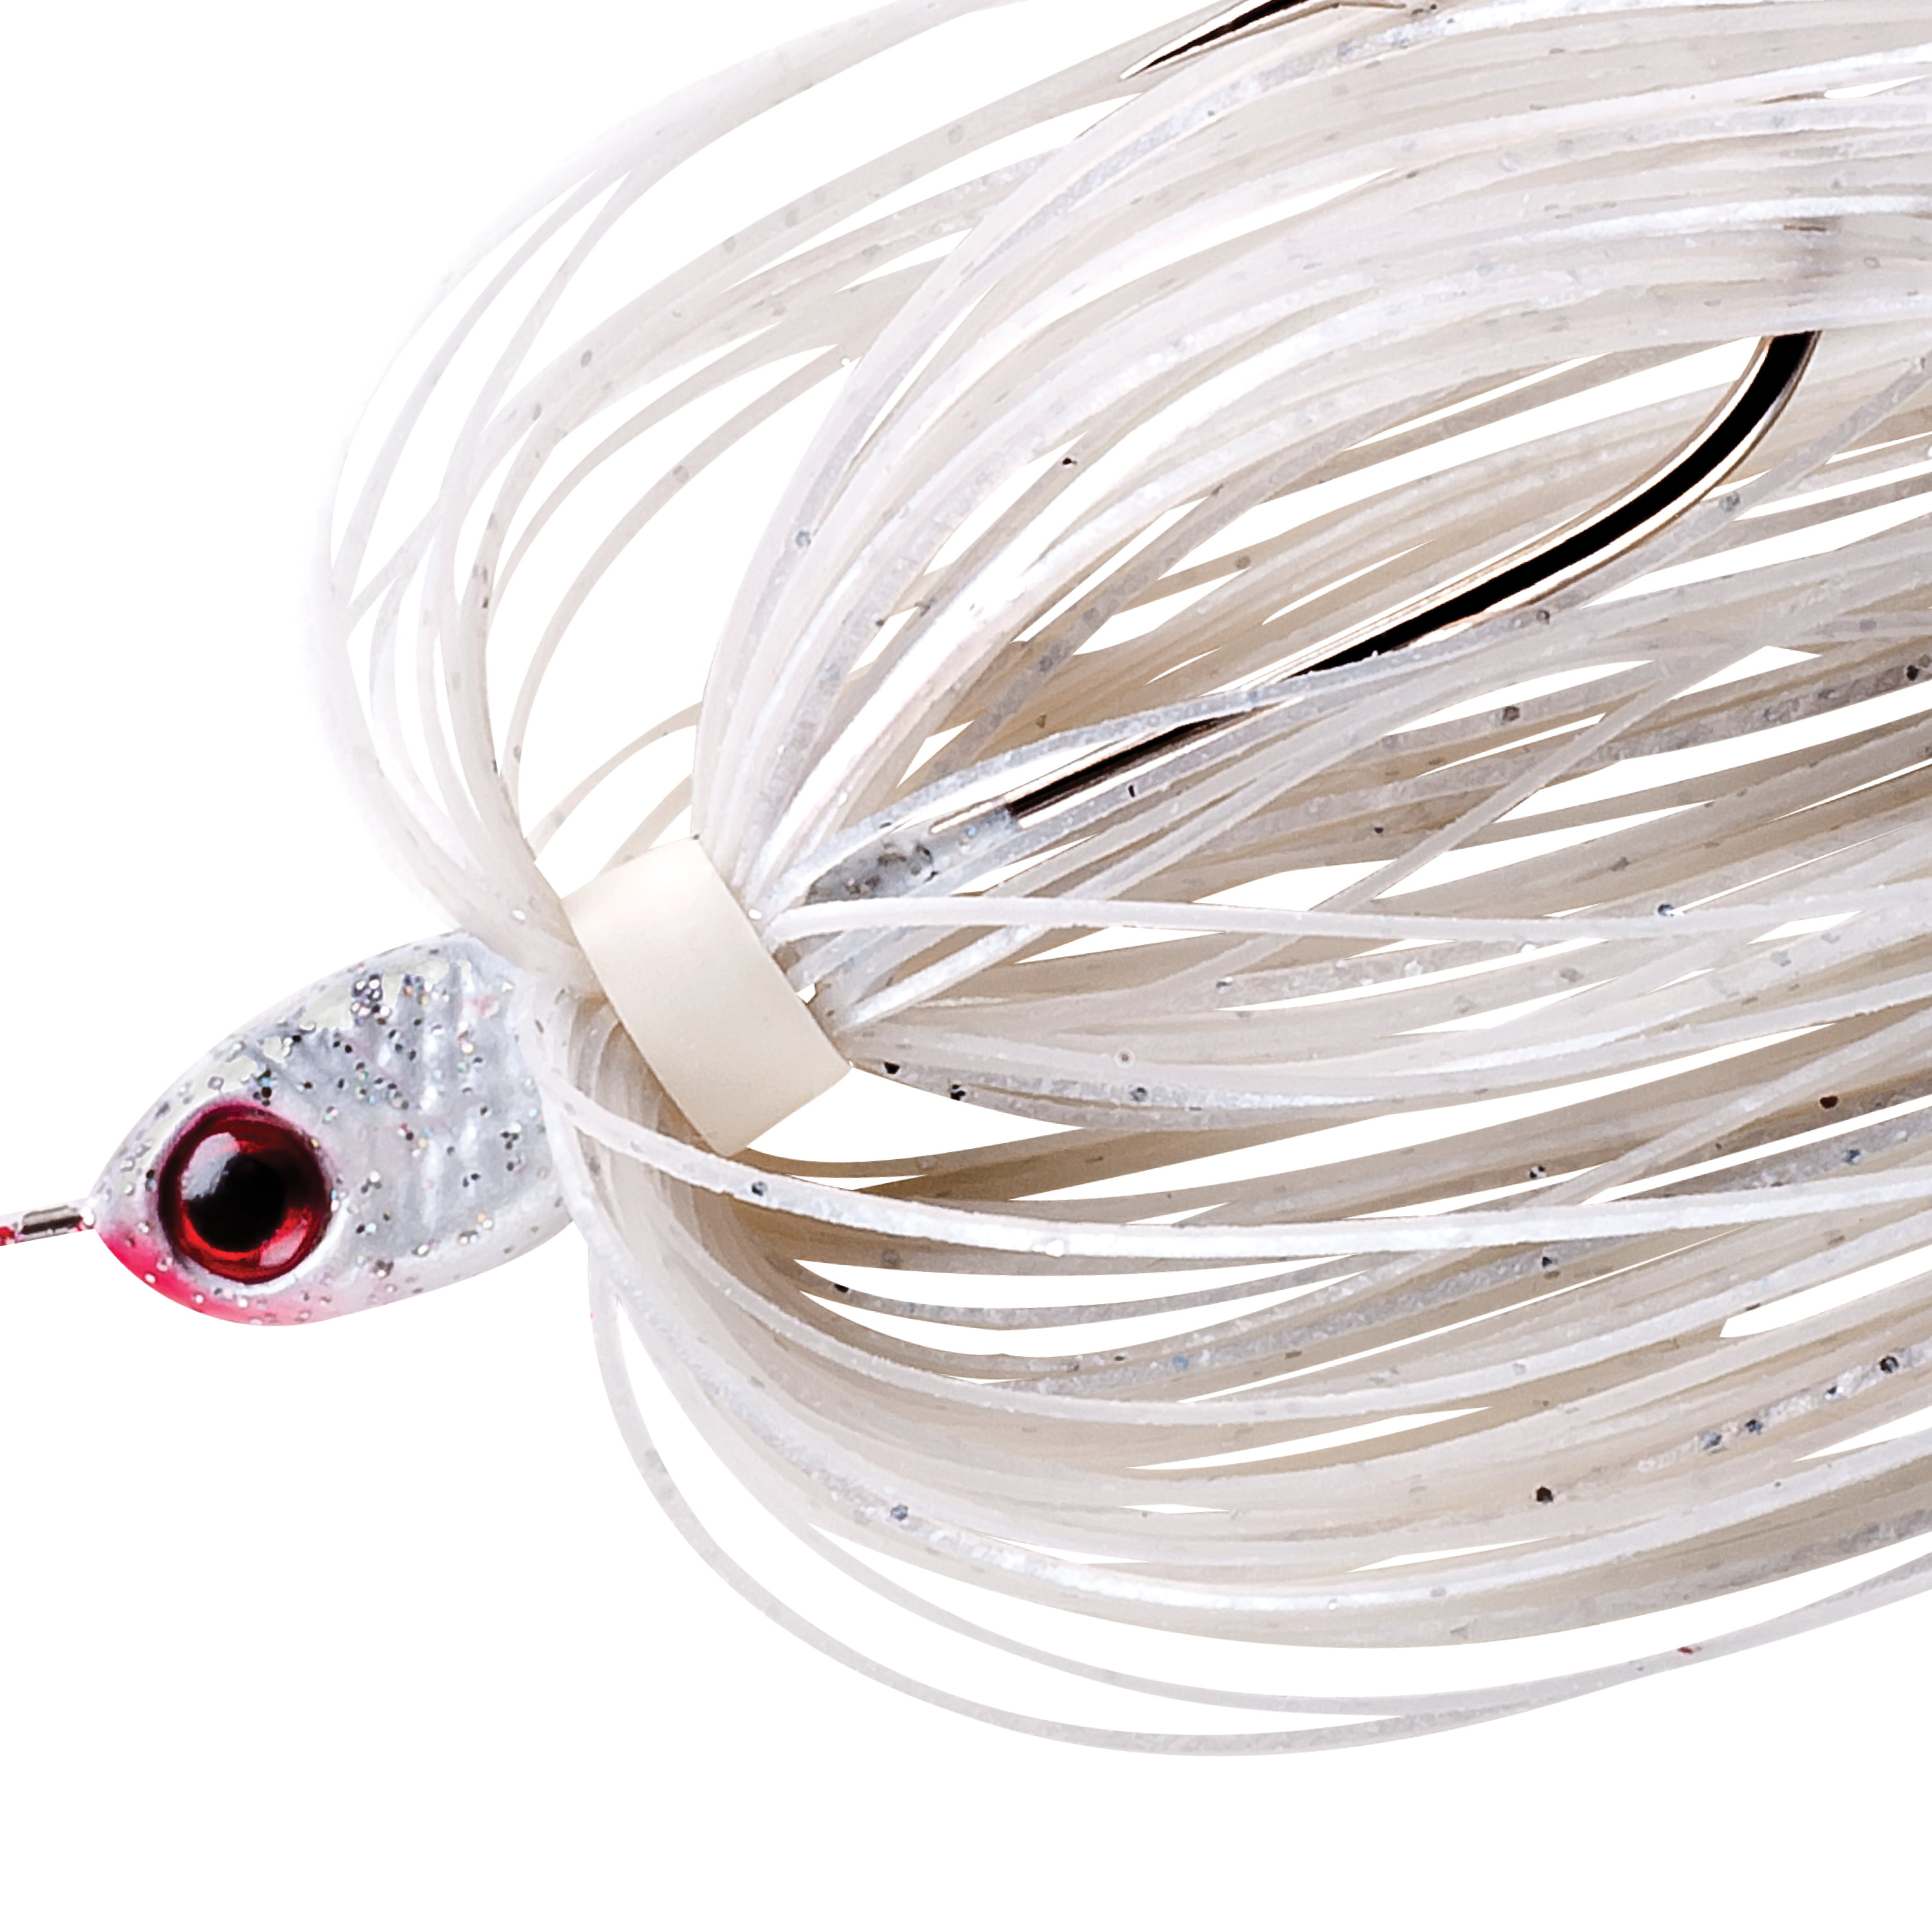 BOOYAH Pond Magic Spinnerbait Red Ant 3/16 oz.